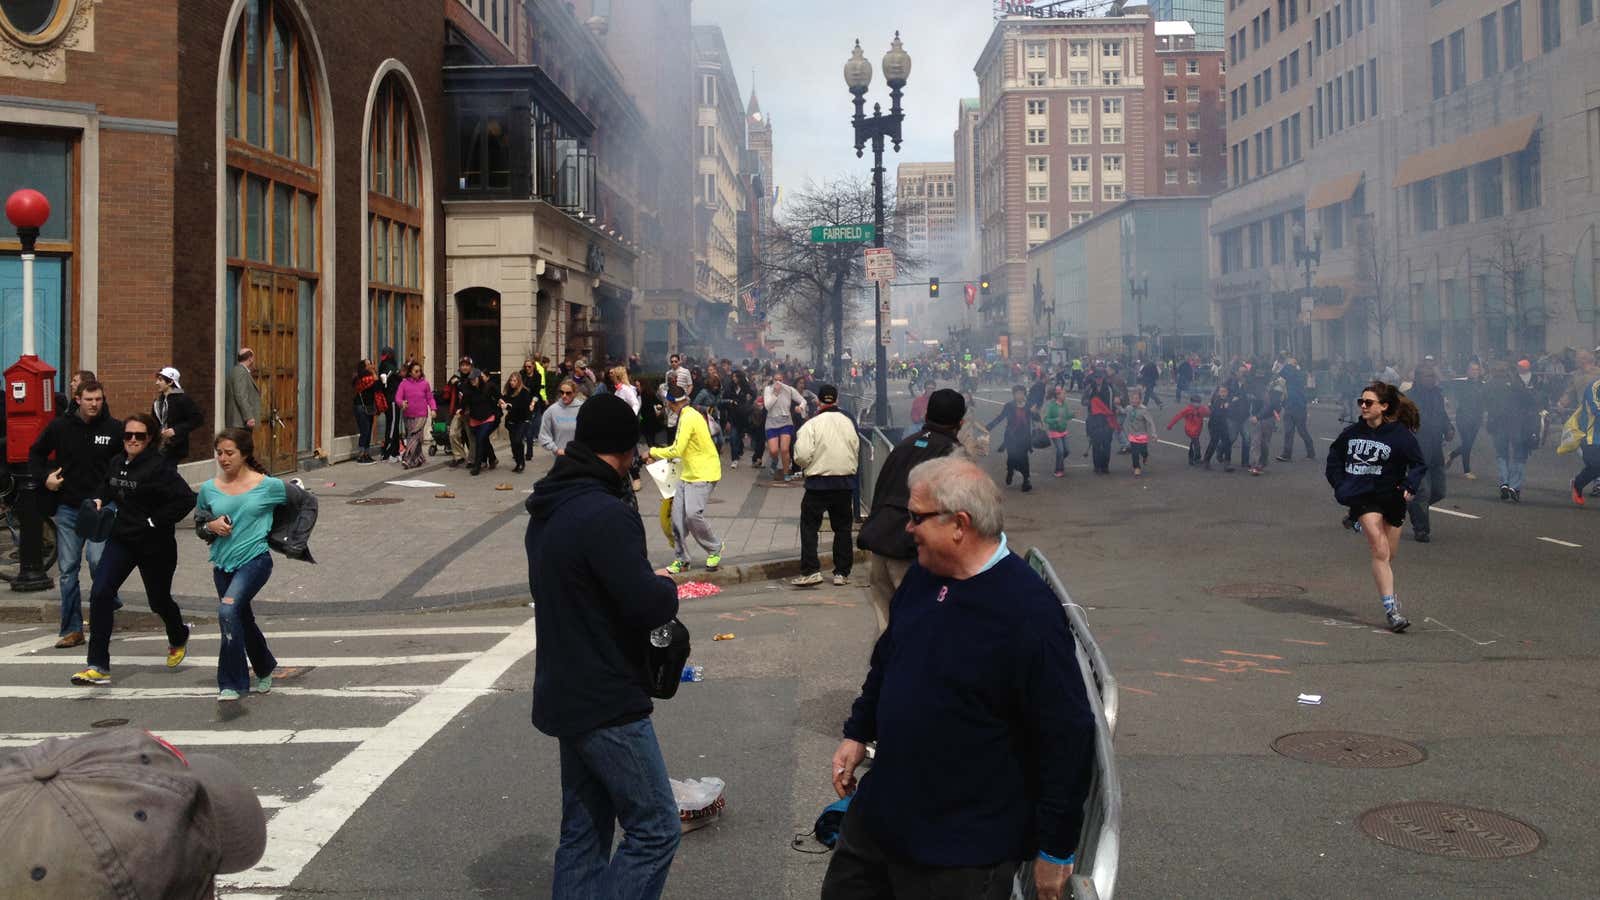 One lingering digital remnant of Dzhokhar, caught in a Facebook photo (in a white cap, at left).